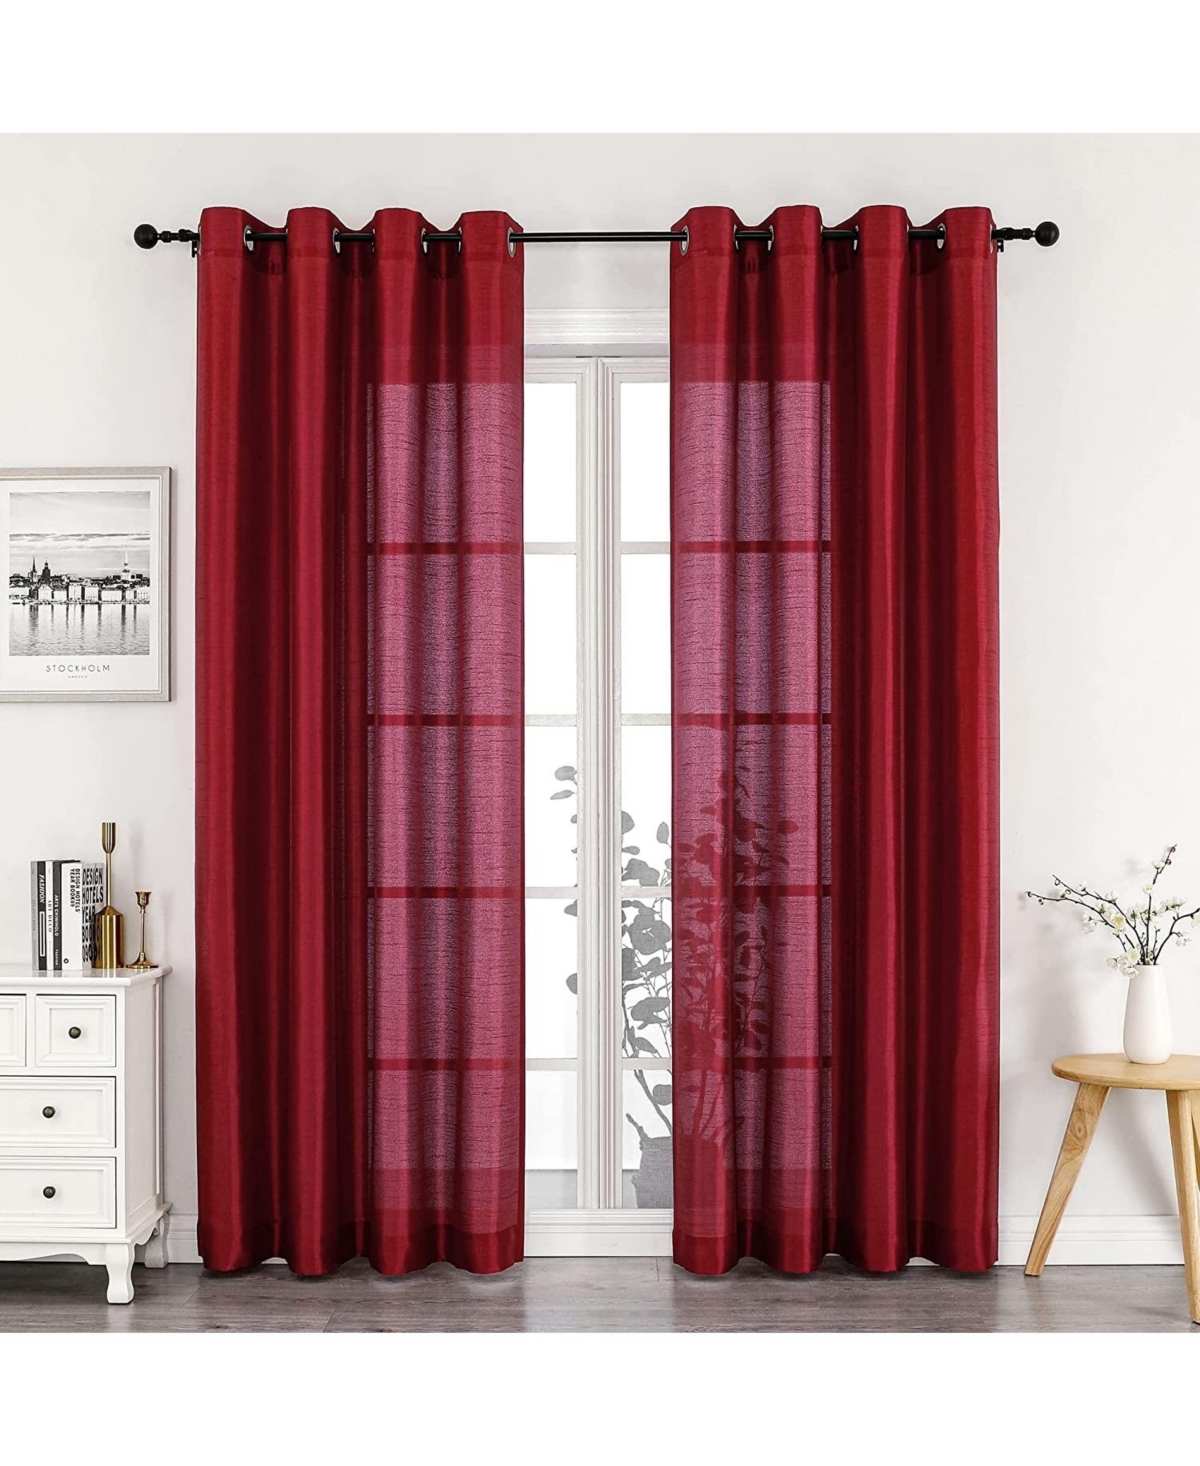 Montauk Accents 2 Pack Ultra Luxurious Faux Silk Sheer Grommet Top Curtain Panels - Fuchsia/pink